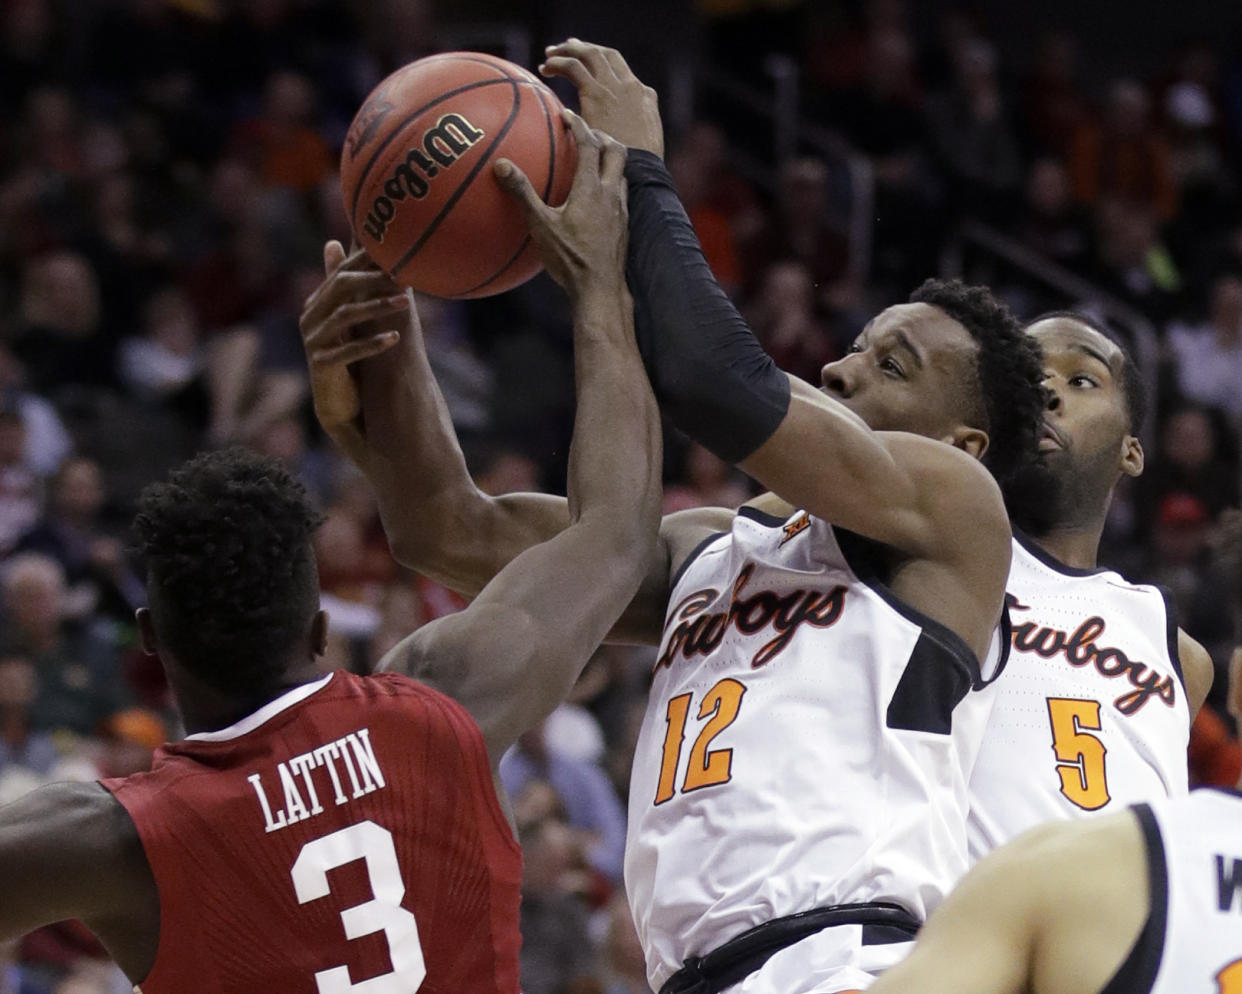 Oklahoma State forward Cameron McGriff (12) and Oklahoma forward Khadeem Lattin (3) reach for a rebound during the second half of an NCAA college basketball game in first round of the Big 12 men’s tournament in Kansas City, Mo., Wednesday, March 7, 2018. Oklahoma State defeated Oklahoma 71-60. (AP Photo/Orlin Wagner)